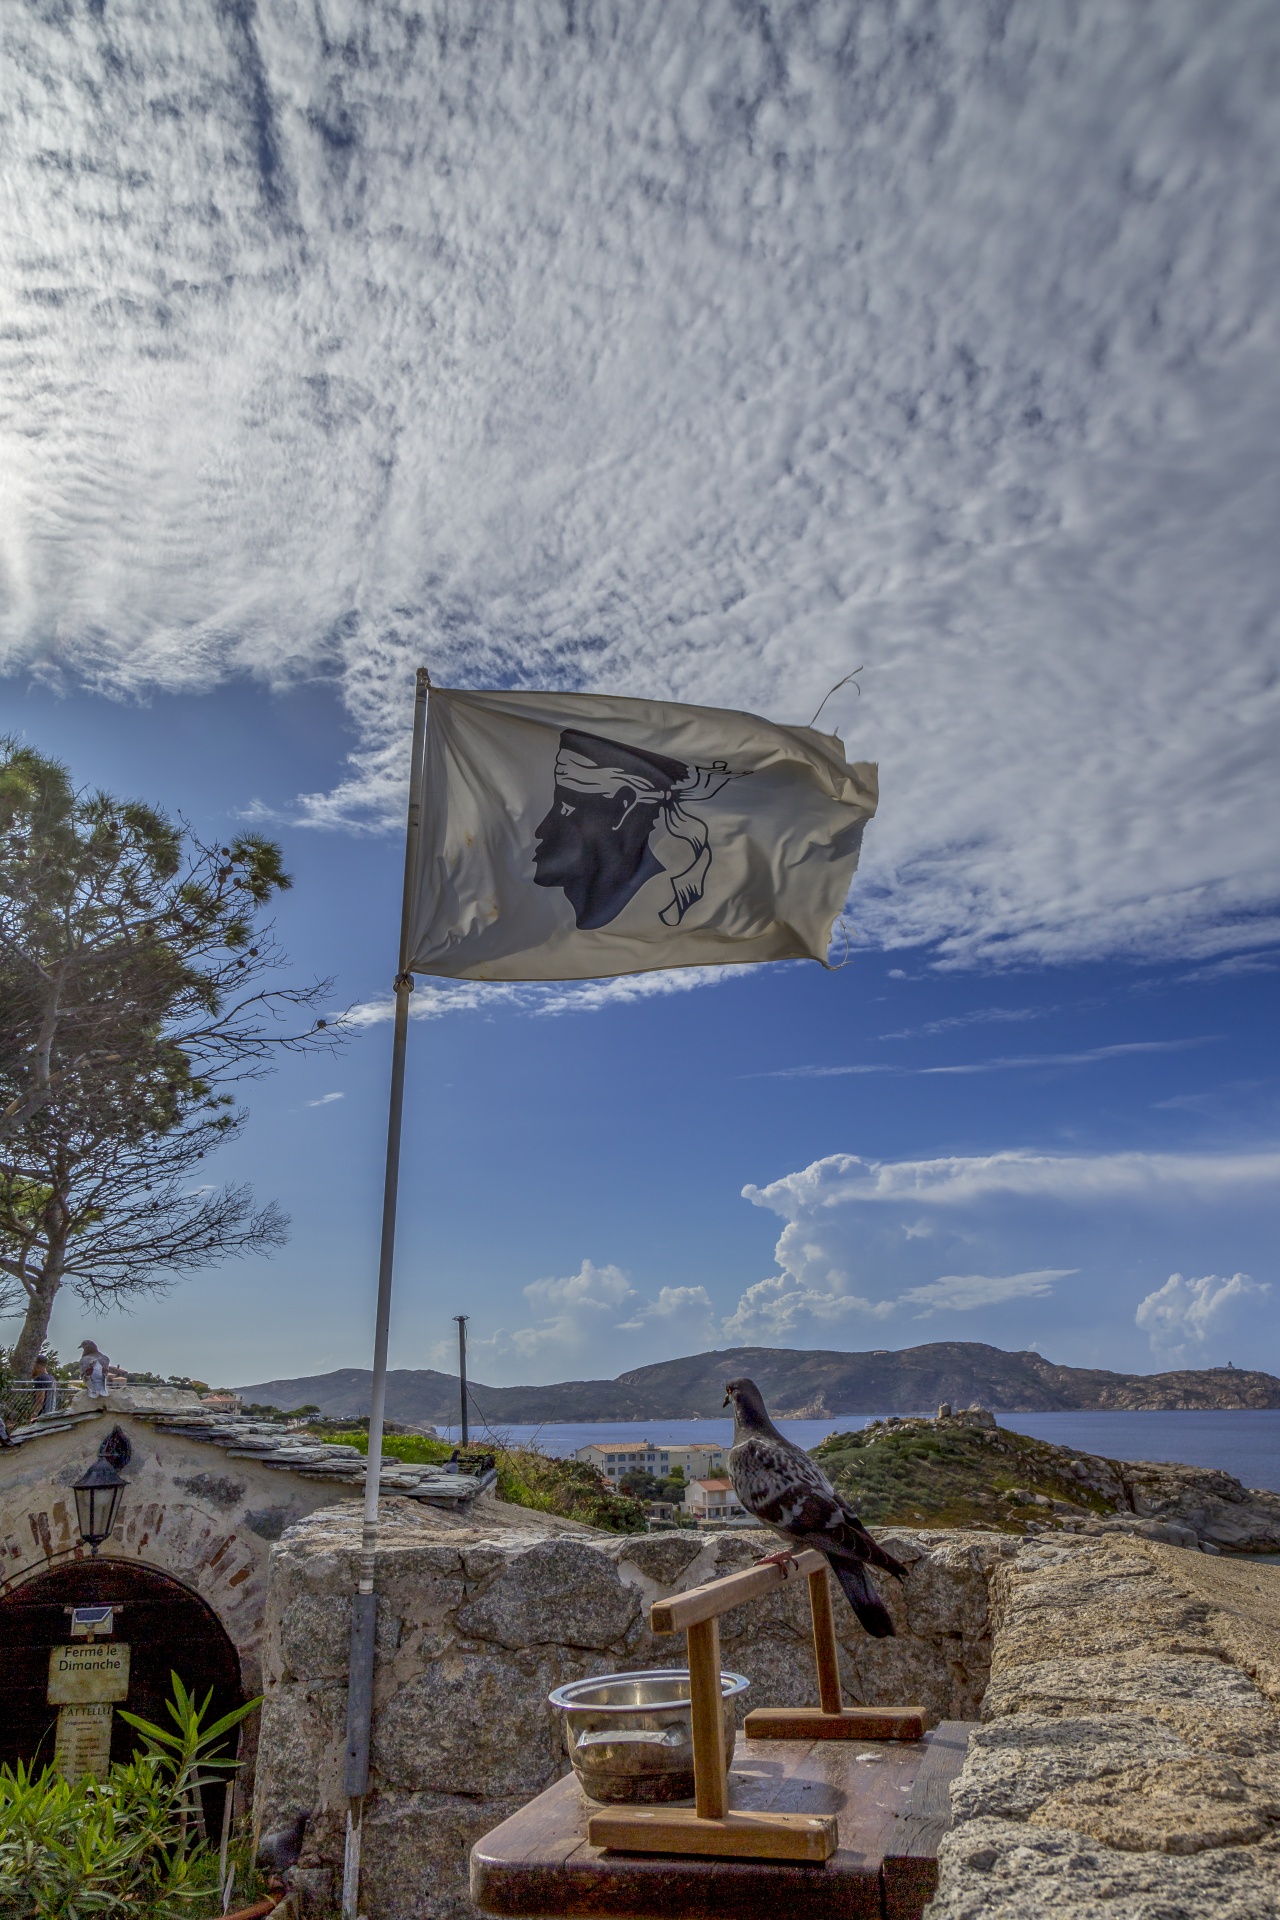 Flag of Corsica was adopted by General of the Nation Pasquale Paoli in 1755 and was based on a traditional flag used previously. It portrays a Moor's head in black wearing a white bandana above his eyes on a white background.